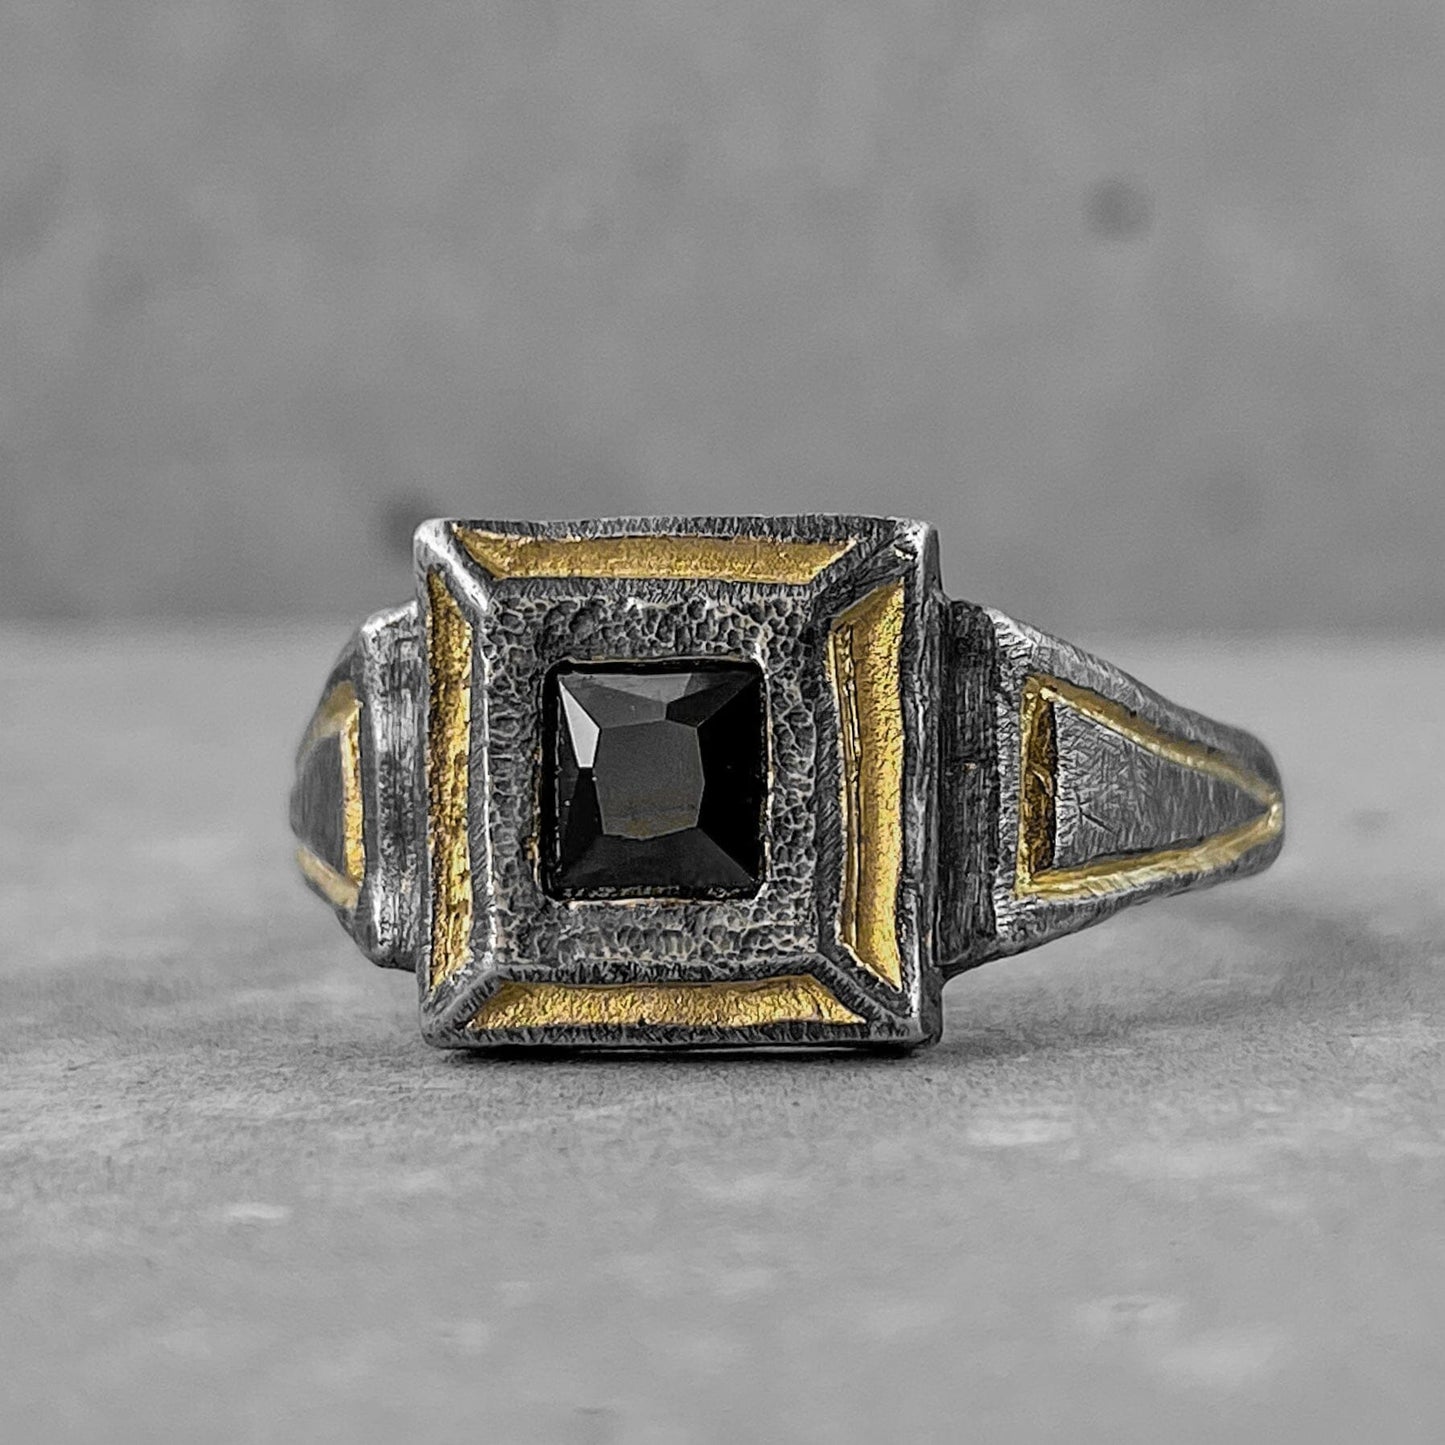 The Renaissance ring- a square signet ring with a large black stone and gold plated elements in the composition. Black diamonds rings Project50g 